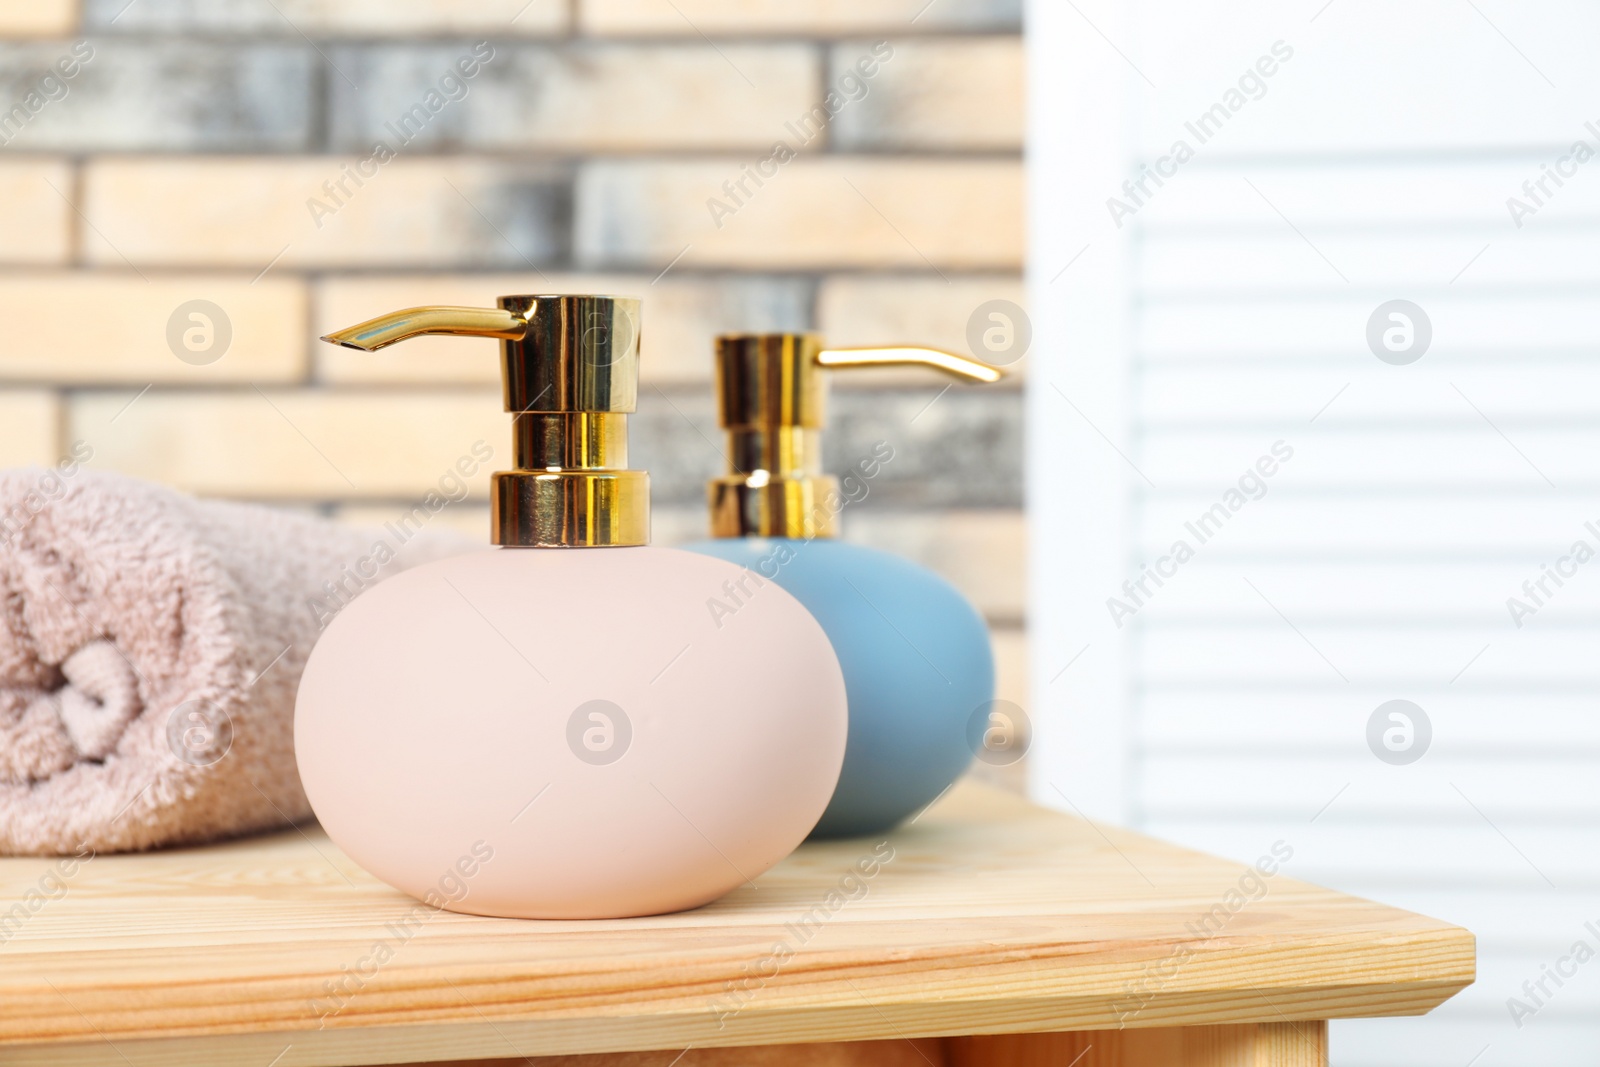 Photo of Stylish soap dispensers and towel on table against blurred background. Space for text